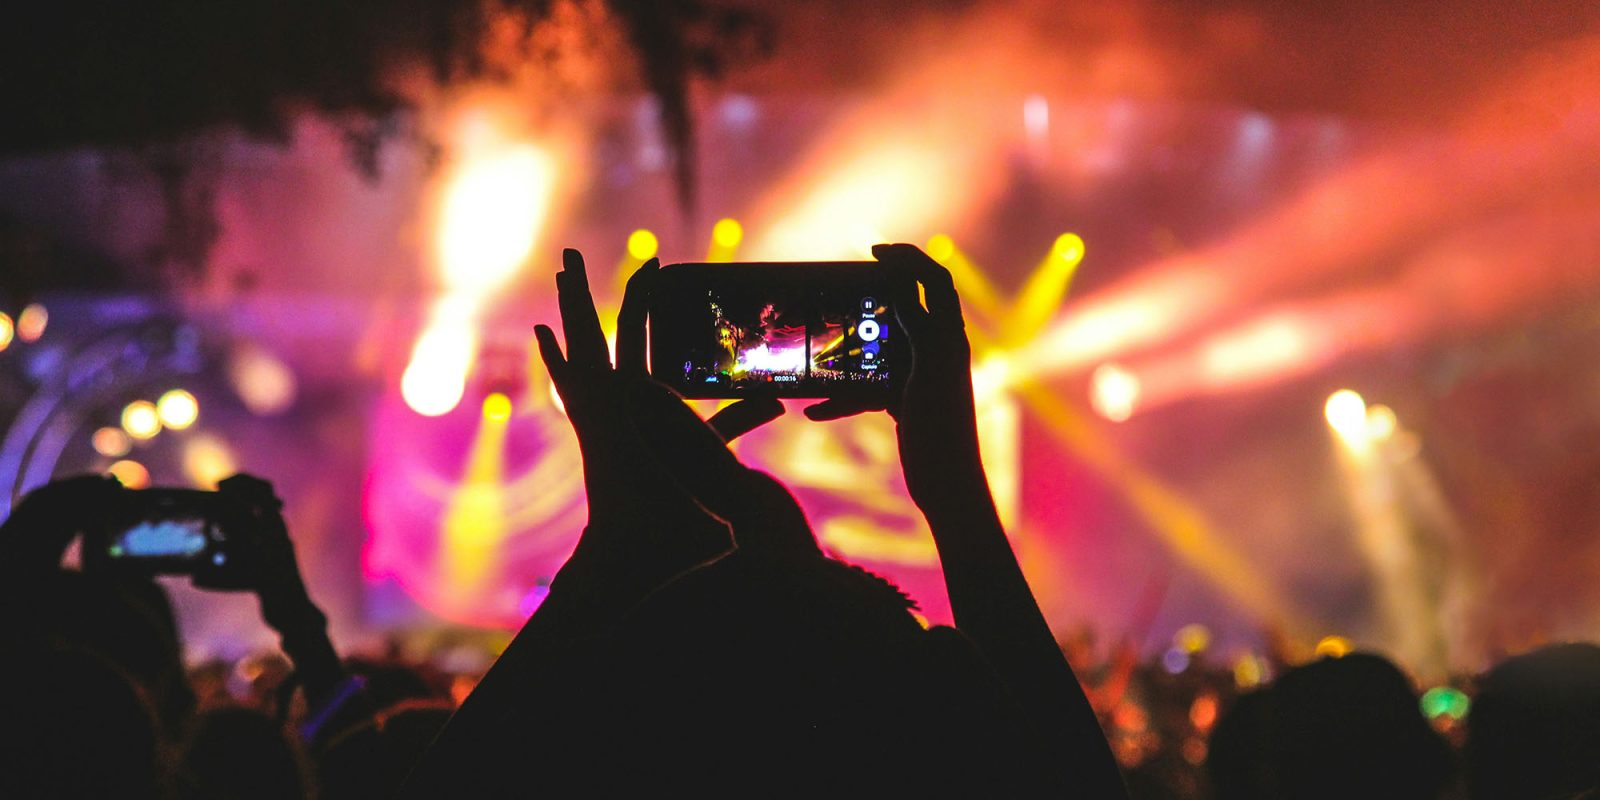 Facebook videos will be recommended by AI | Shooting iPhone video at a concert